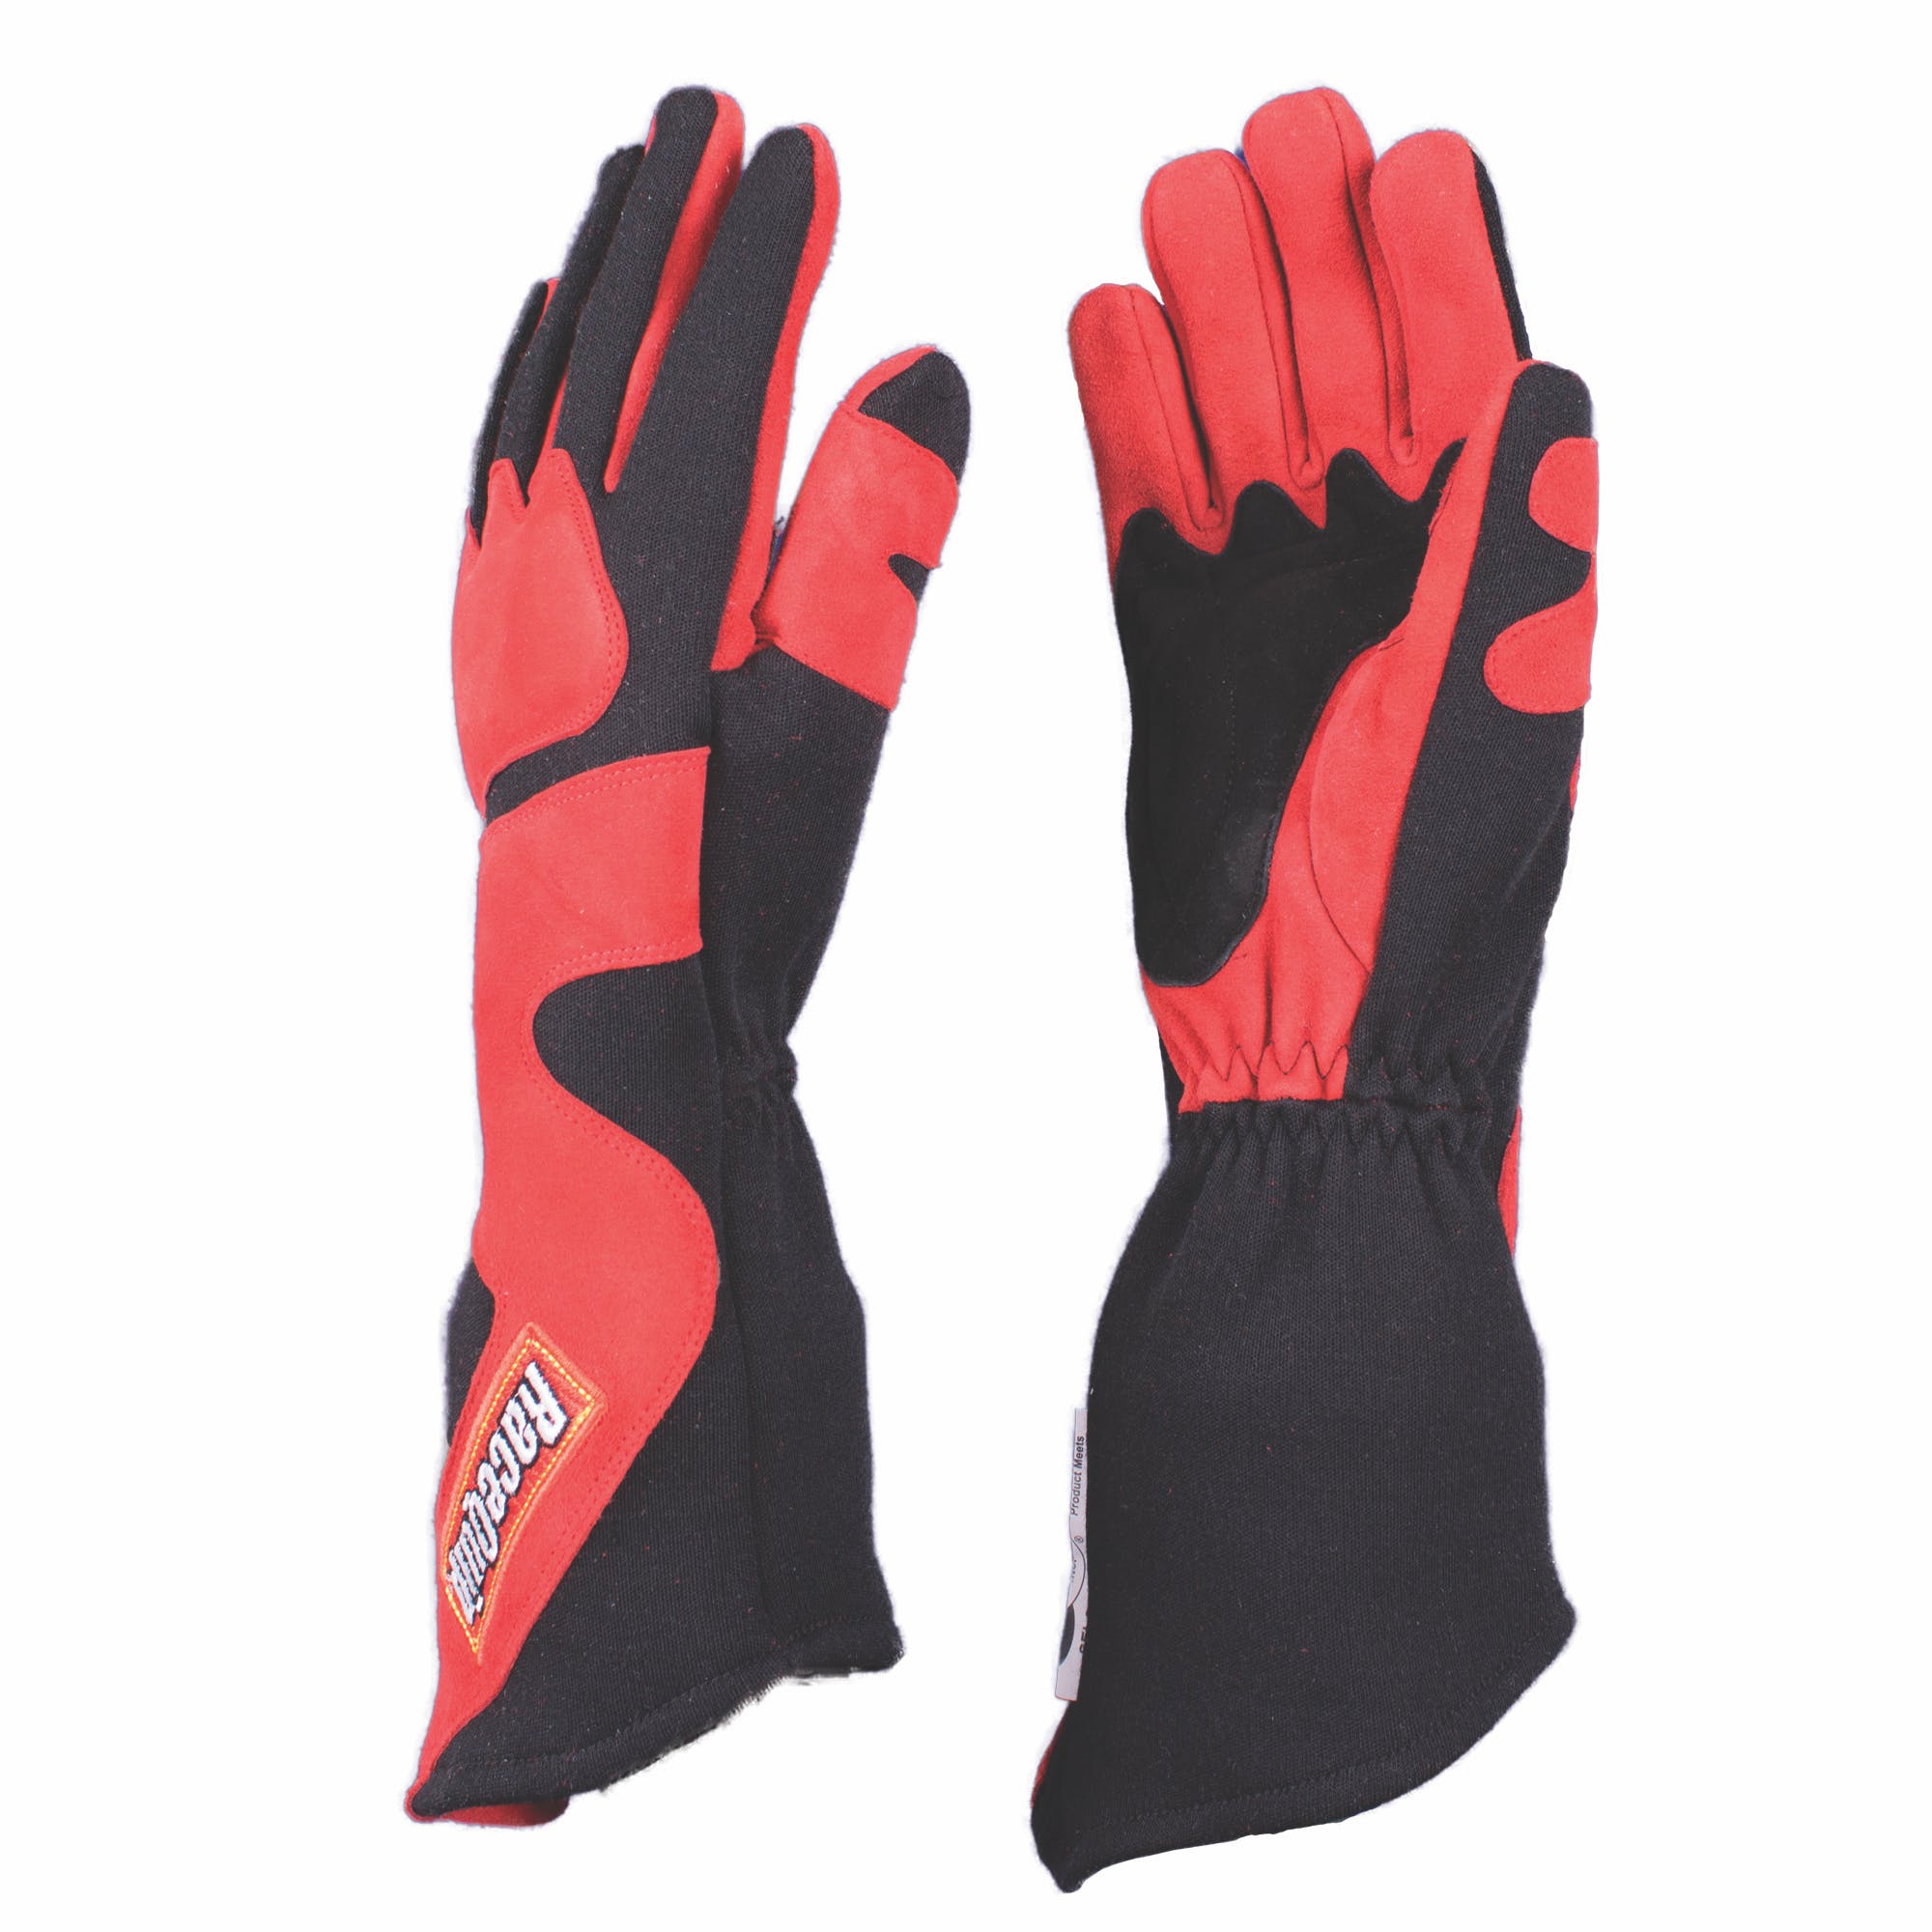 RaceQuip 358107 SFI-5 Angle-Cut Long Gauntlet Racing Gloves (Red/Black, XX-Large)